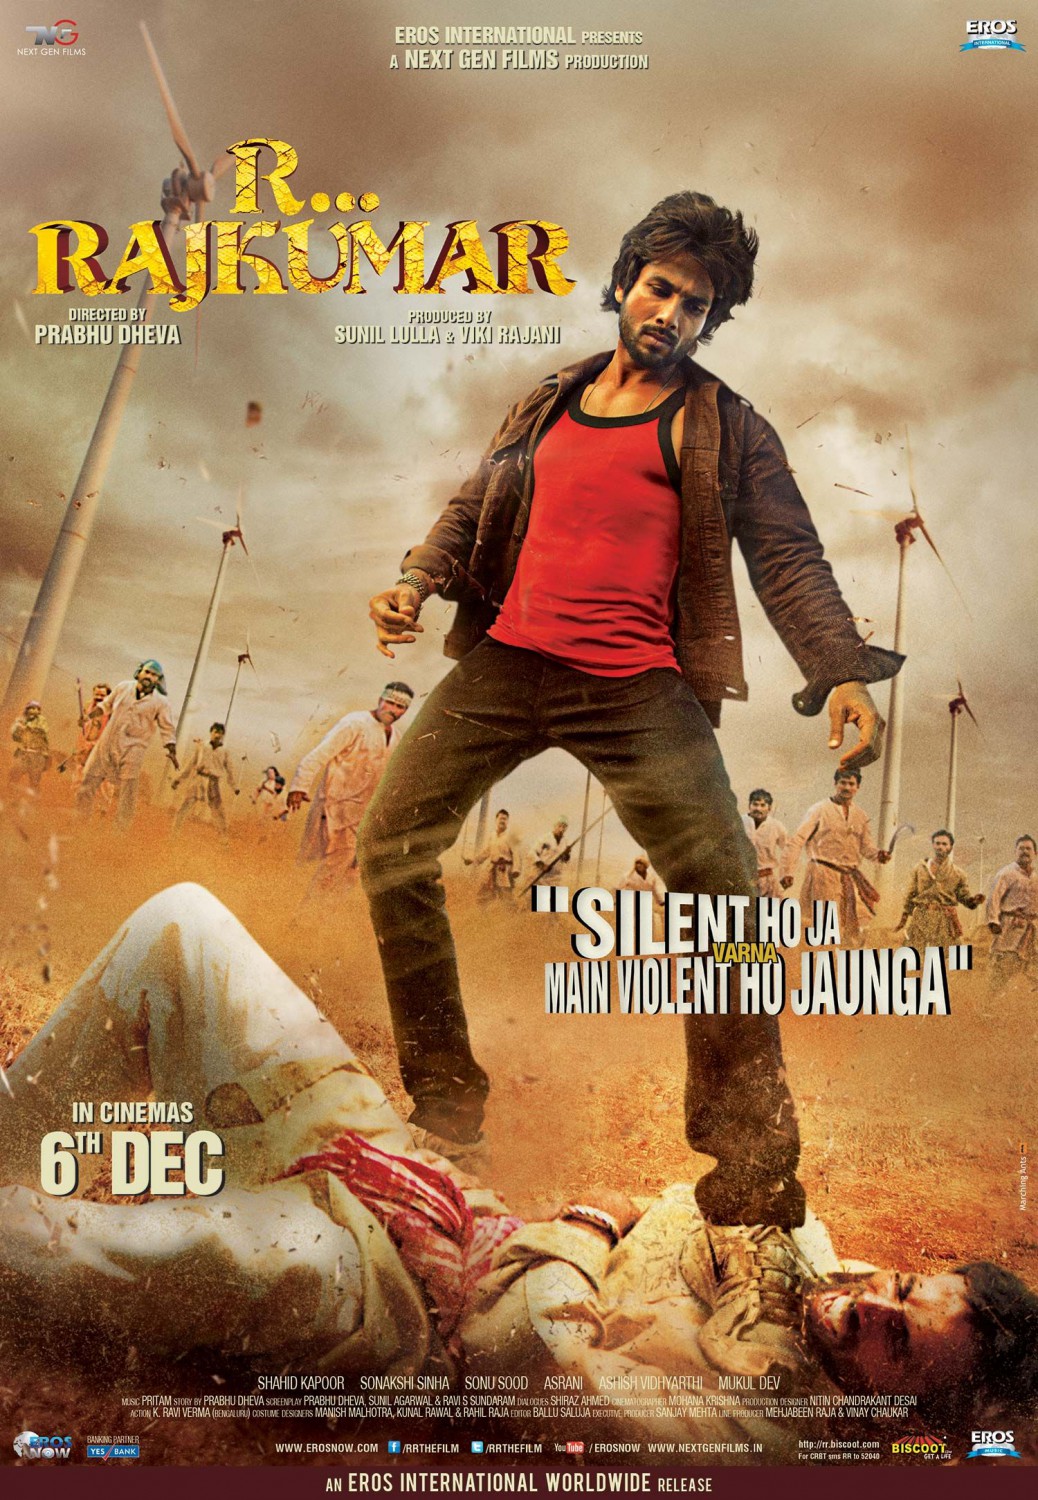 Extra Large Movie Poster Image for R... Rajkumar (#5 of 5)